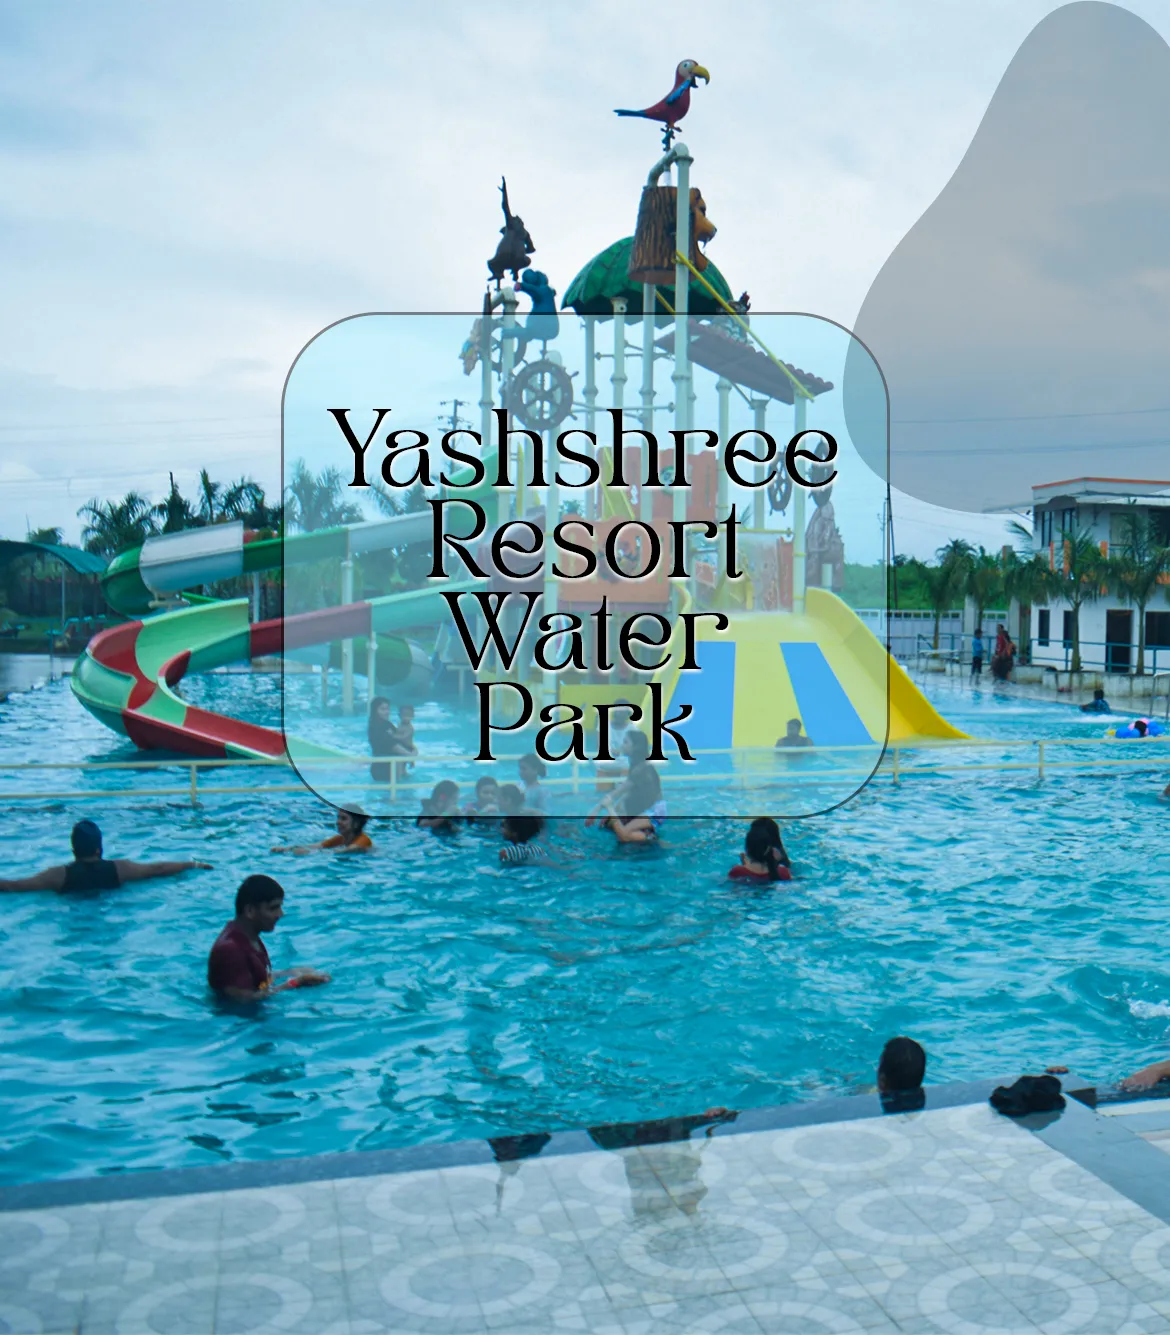 Yashshree Resort Water Park Entry Charges